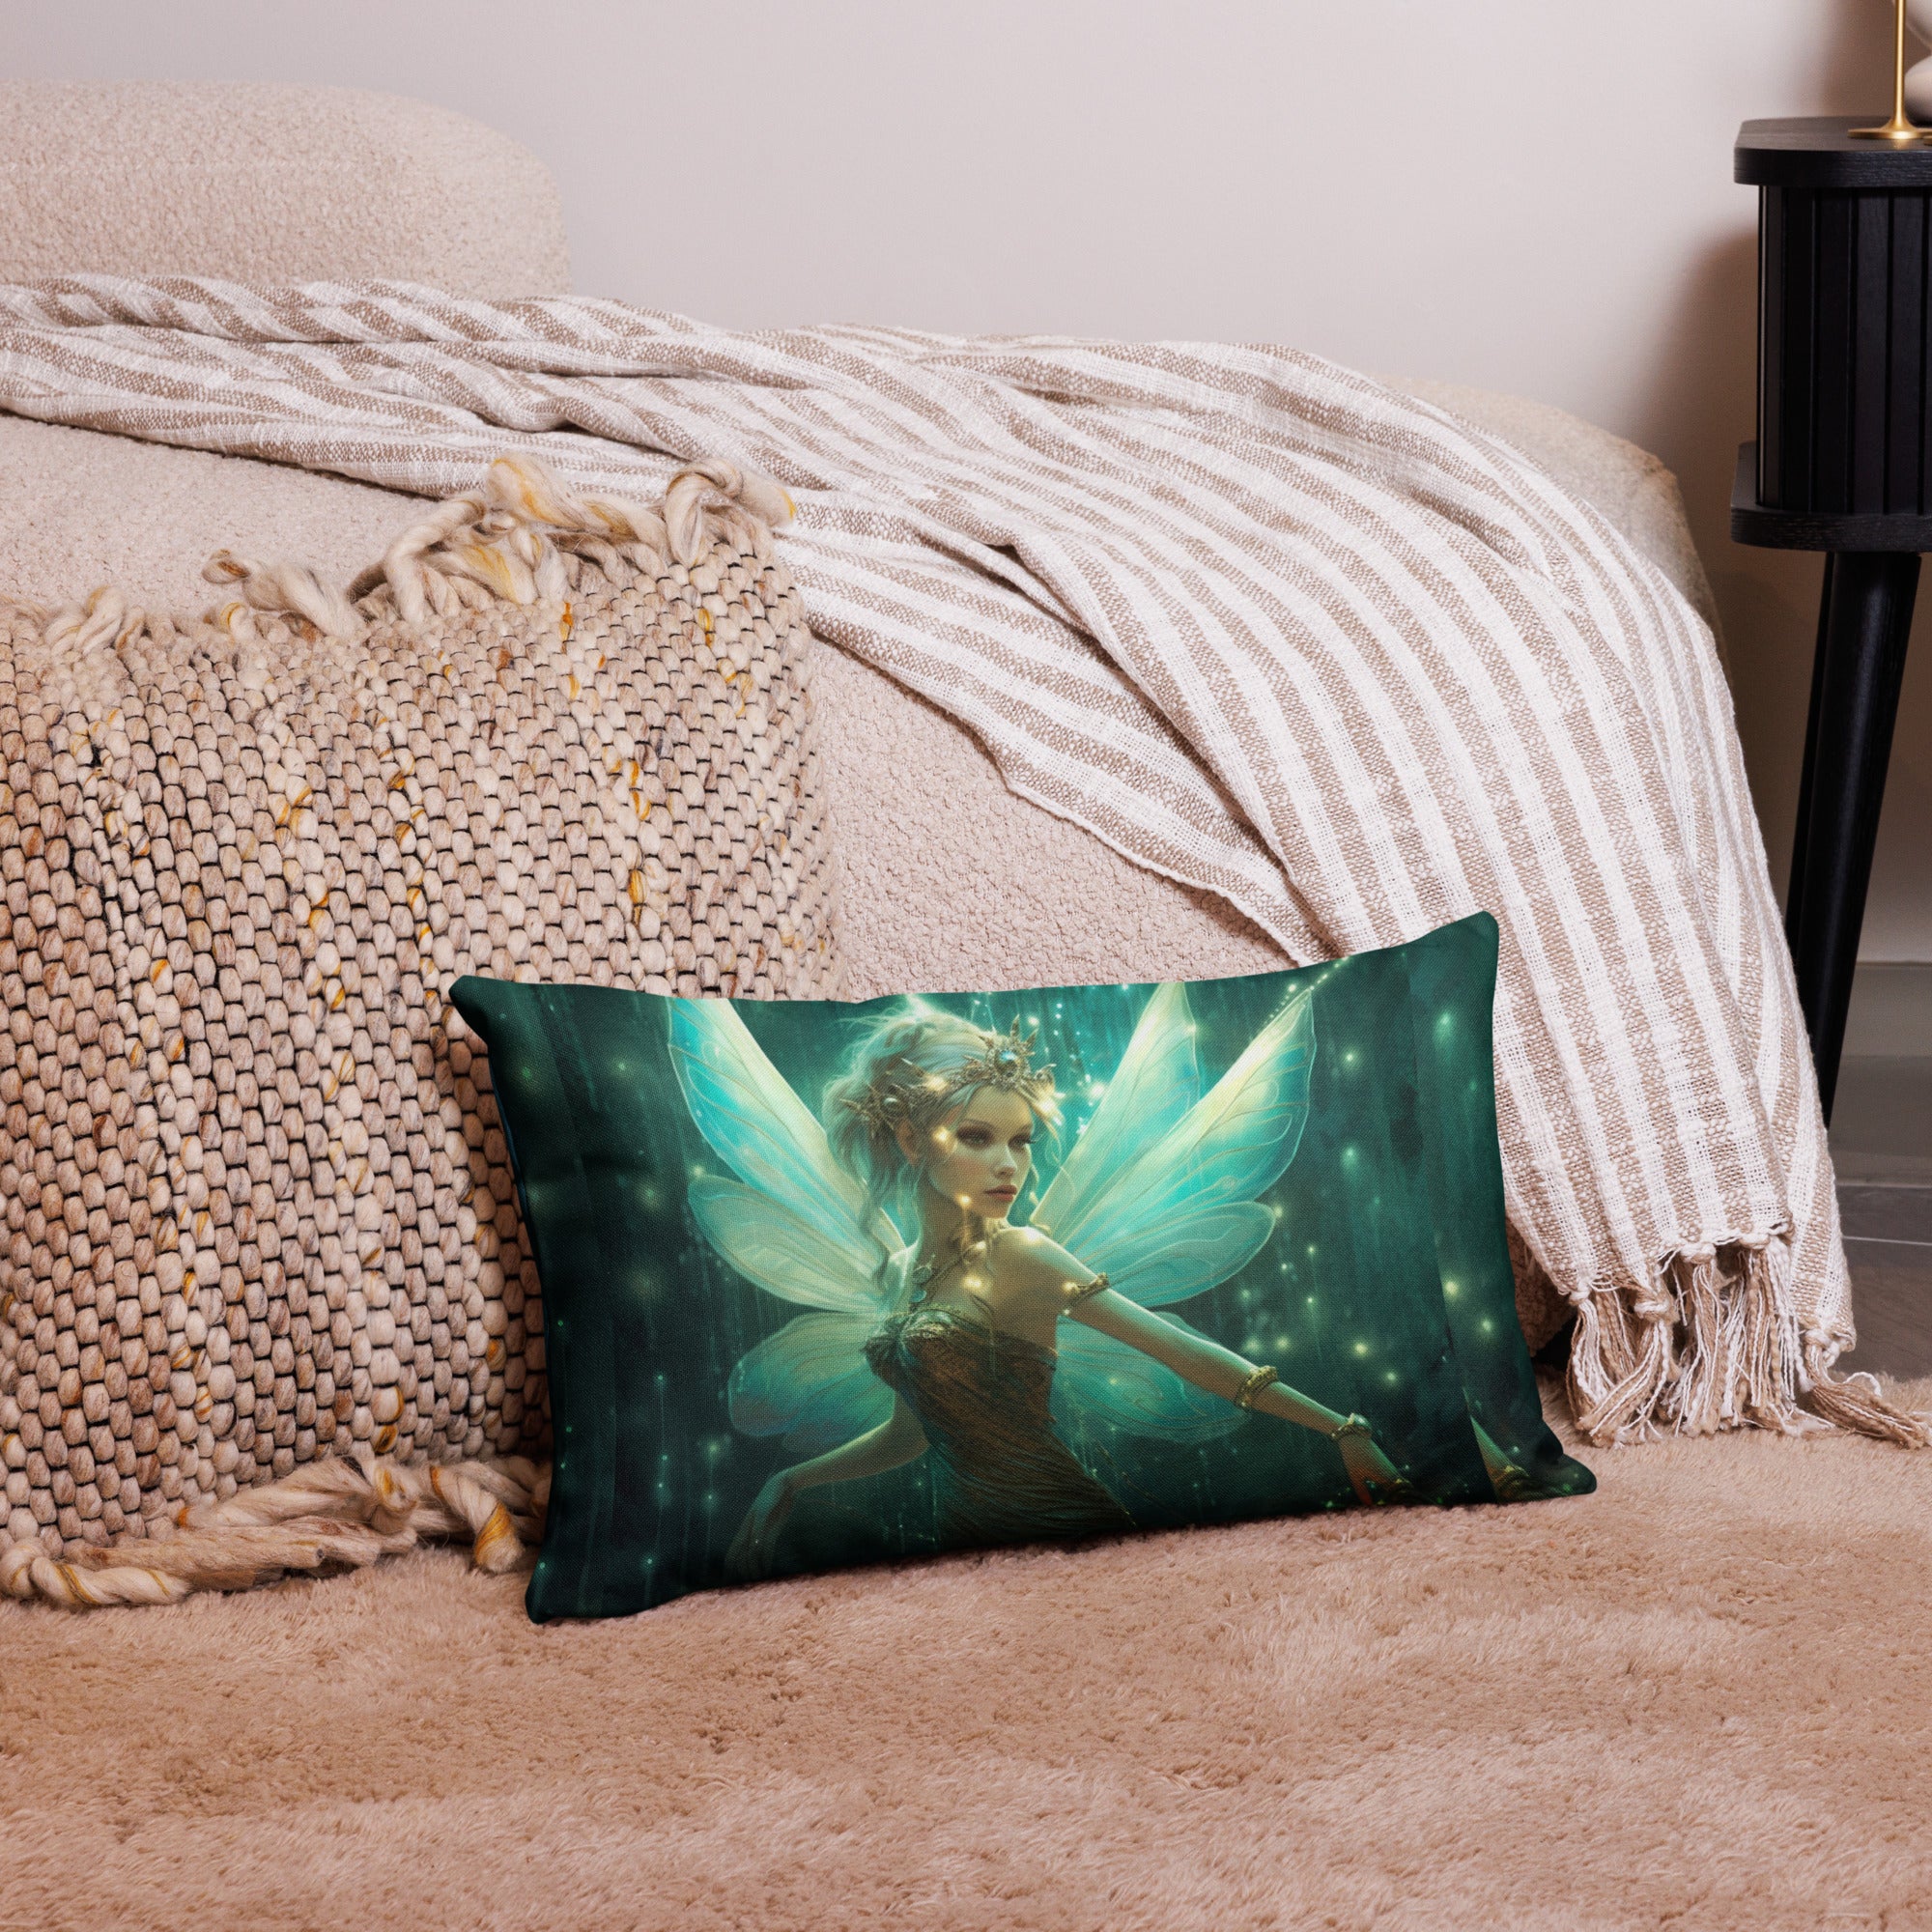 Enchanted Dreams Fairy Pillow Case: A Sparkling Starry Addition to Your Princess's Room | Fairy Pillow Case